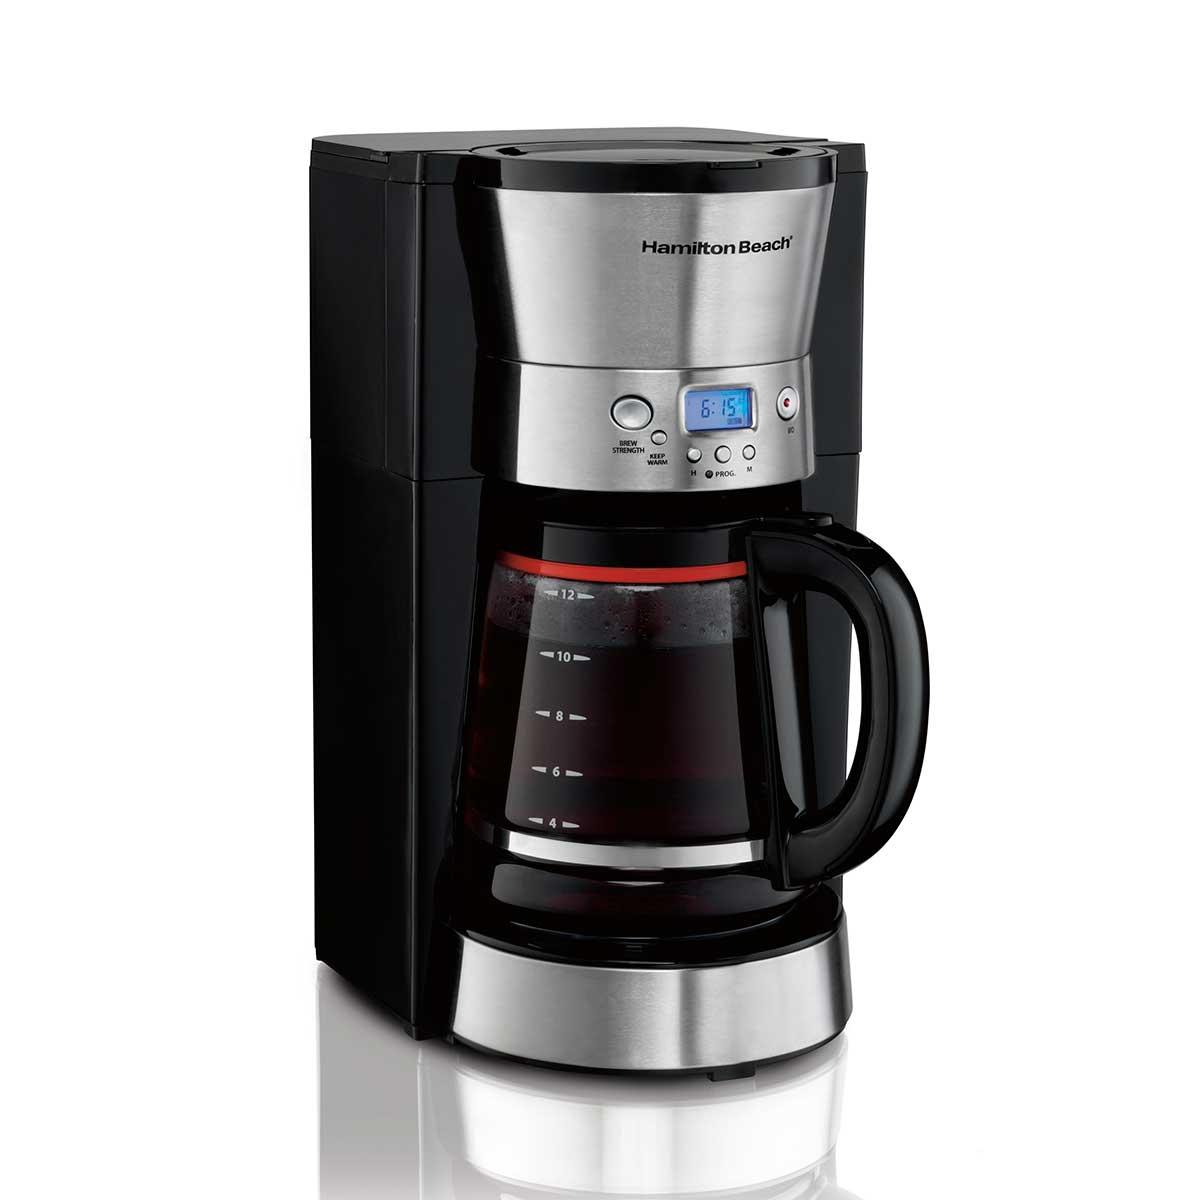 Hamilton Beach 12-Cup Programmable Coffee Maker with Cone